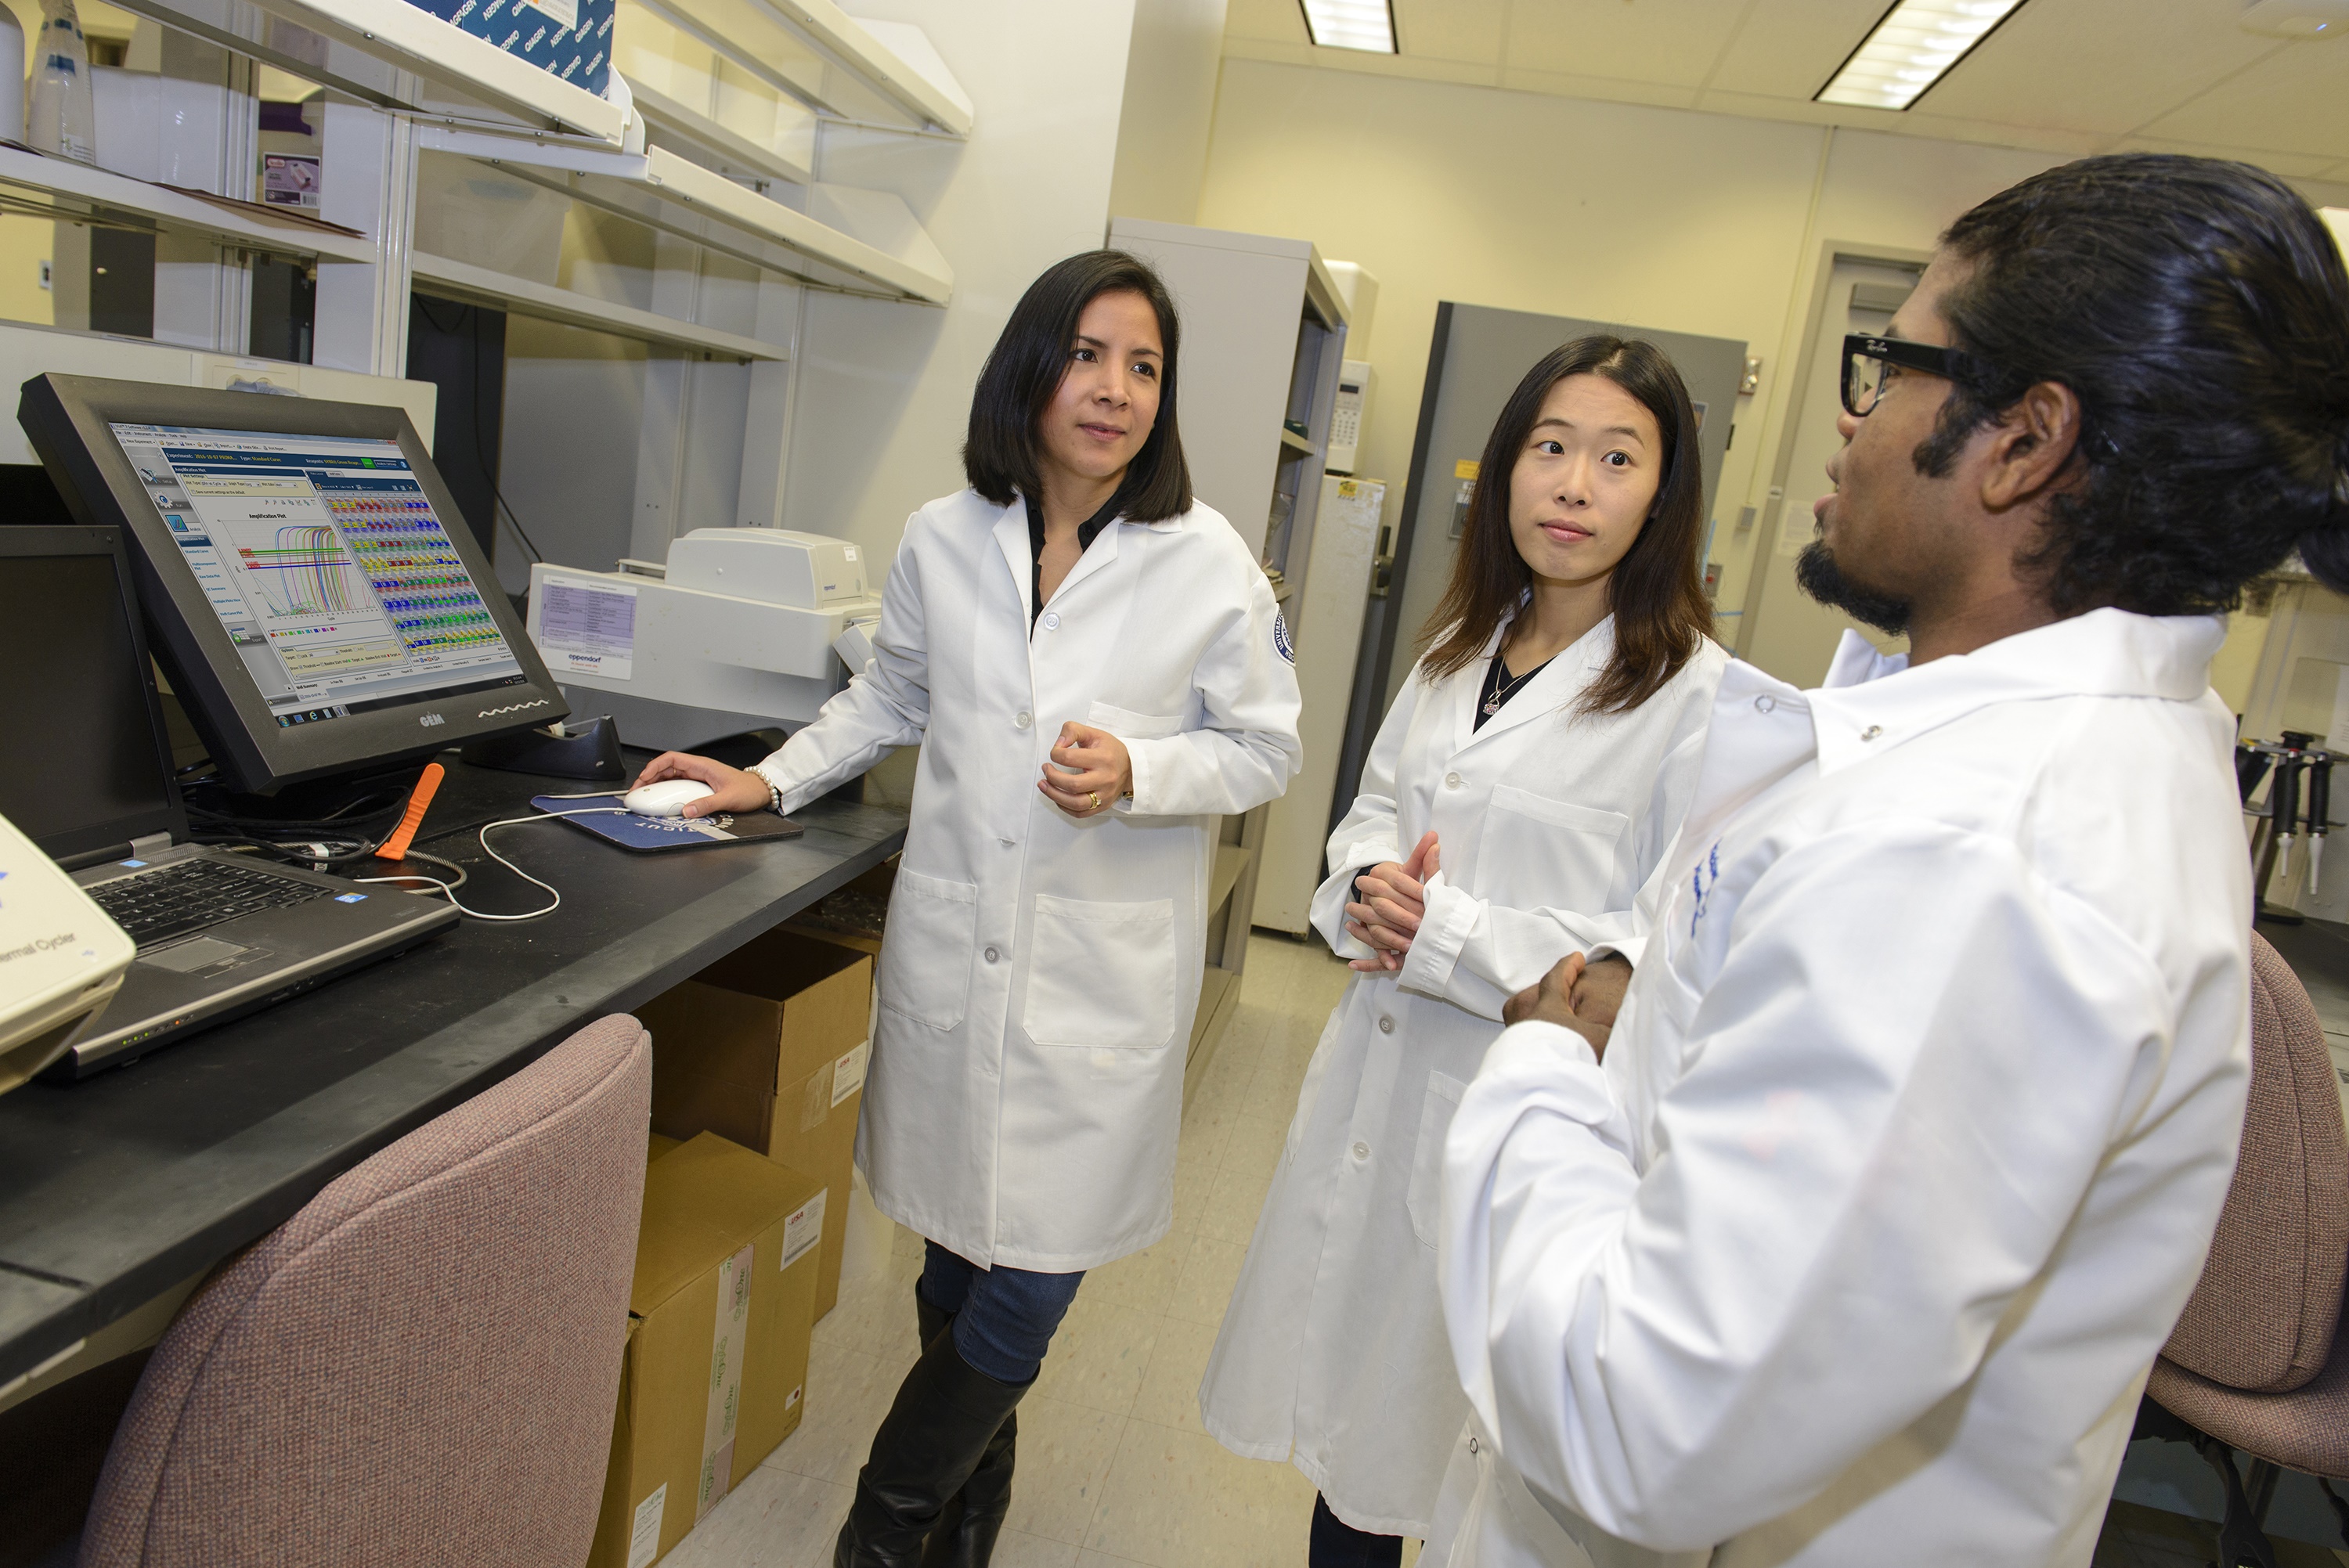 Denisse Tafur, Huakang Huang and Dinesh Babu Uthaya Kumar are UConn Graduate School students studying biomedical science who completed advanced training in translational research at the NIH's Clinical Center this summer.